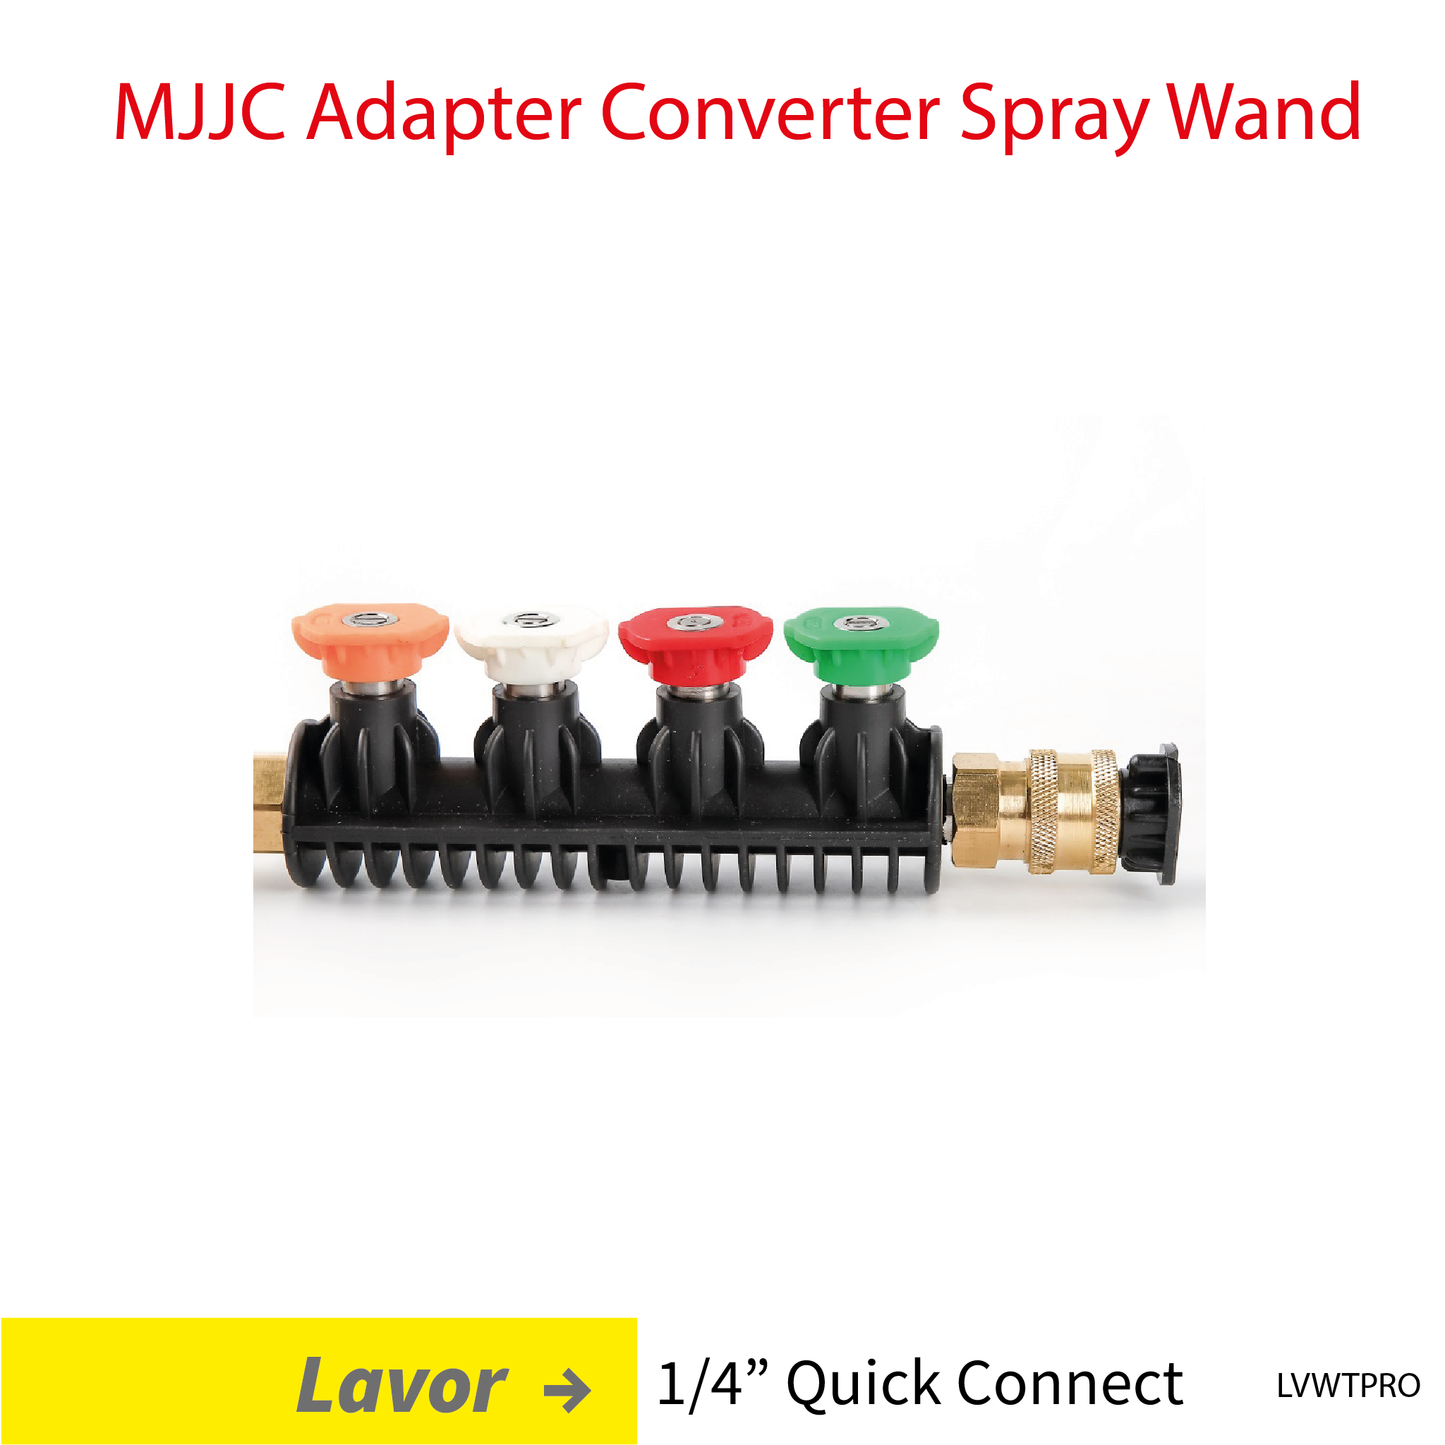 Lavor MJJC Adapter Conversion Converter pressure washer Spray Wand with 5 spray tips